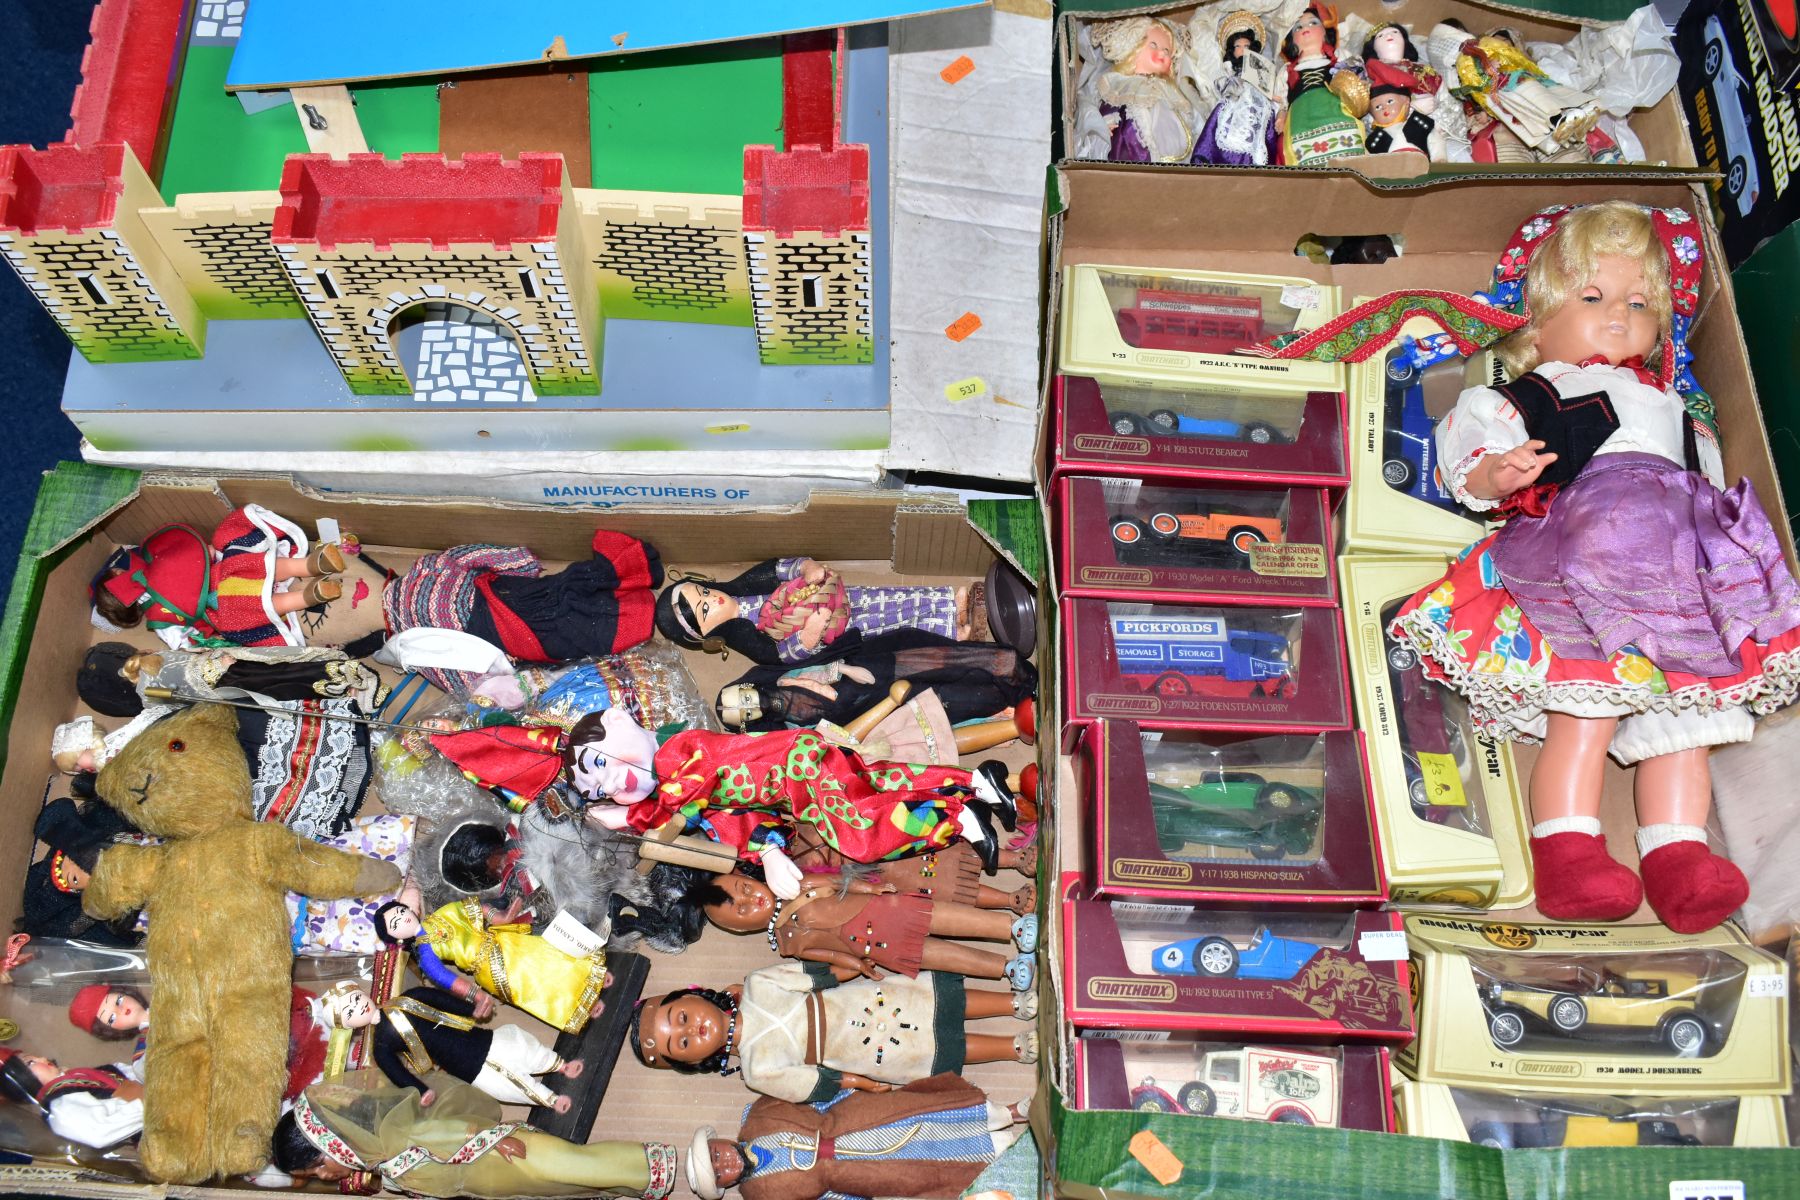 A QUANTITY OF ASSORTED COLLECTORS AND COSTUME DOLLS, various styles and nationalities, well loved